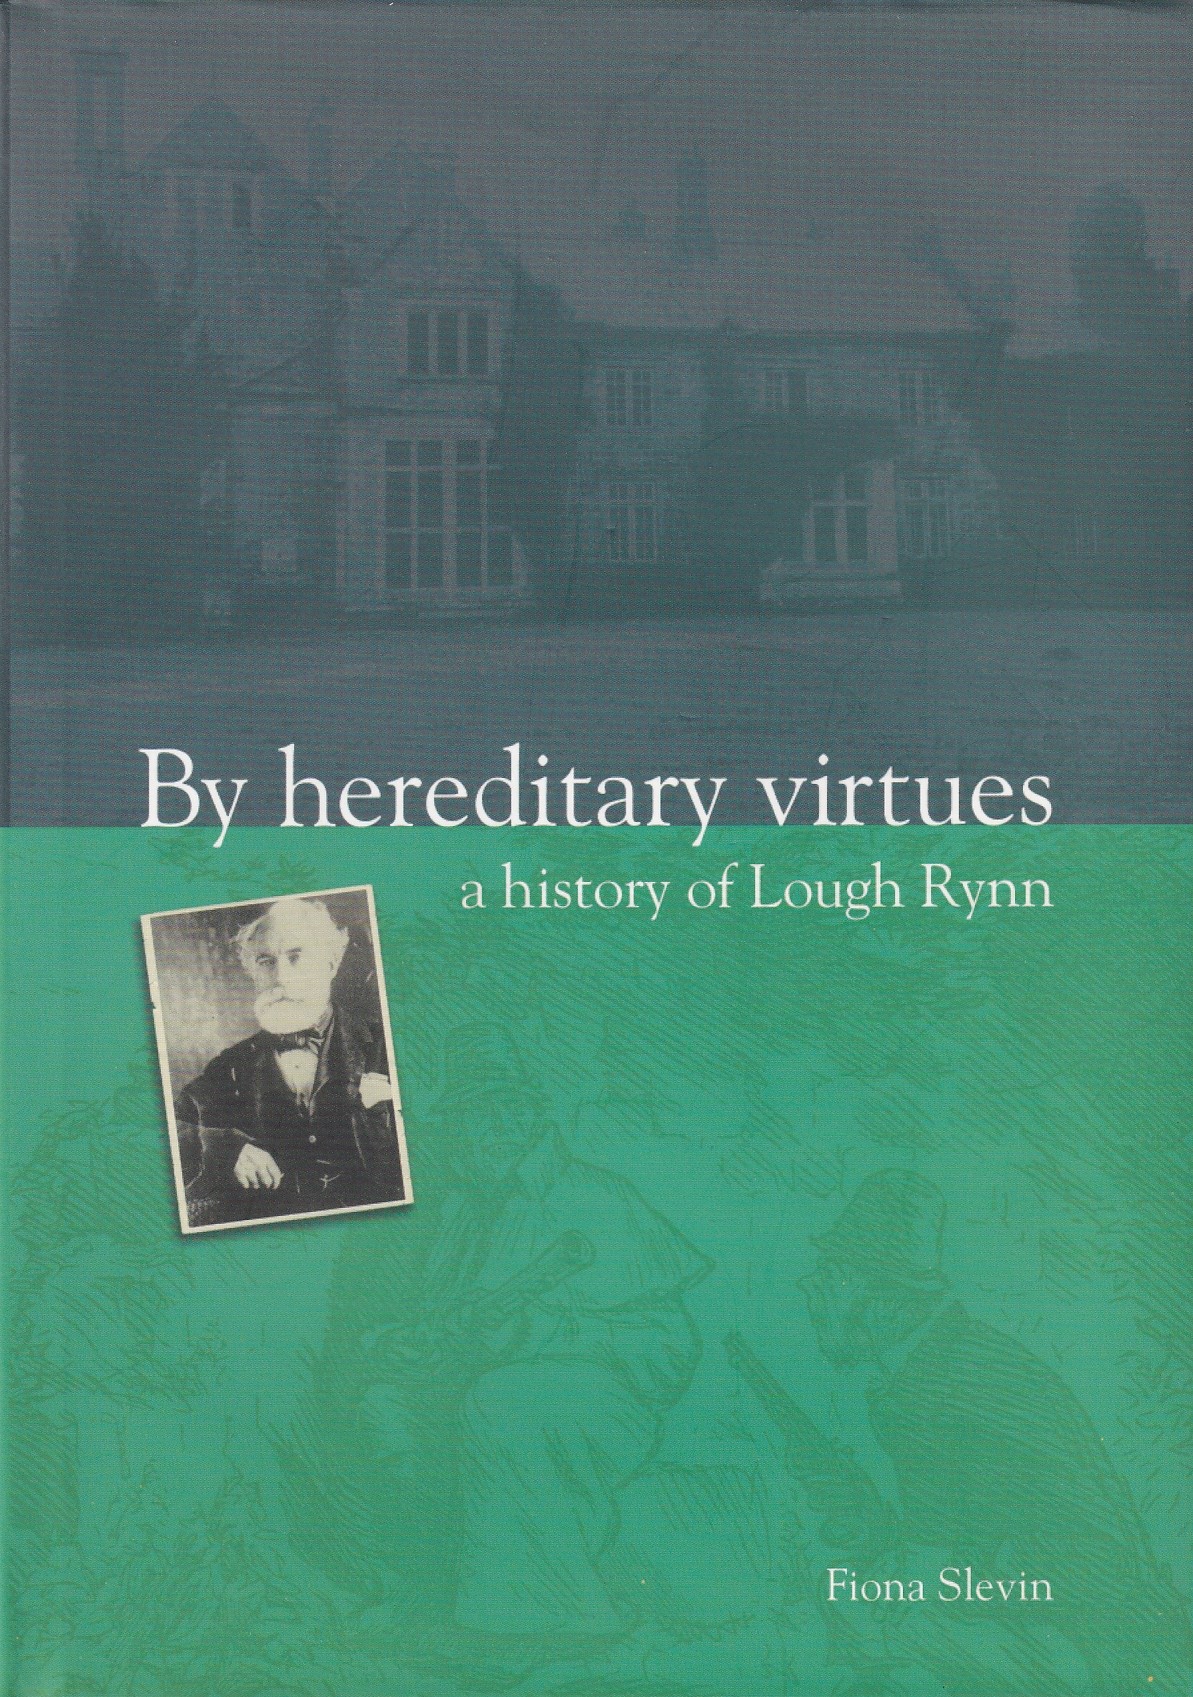 By Hereditary Virtues: A History of Lough Rynn by Fiona Slevin